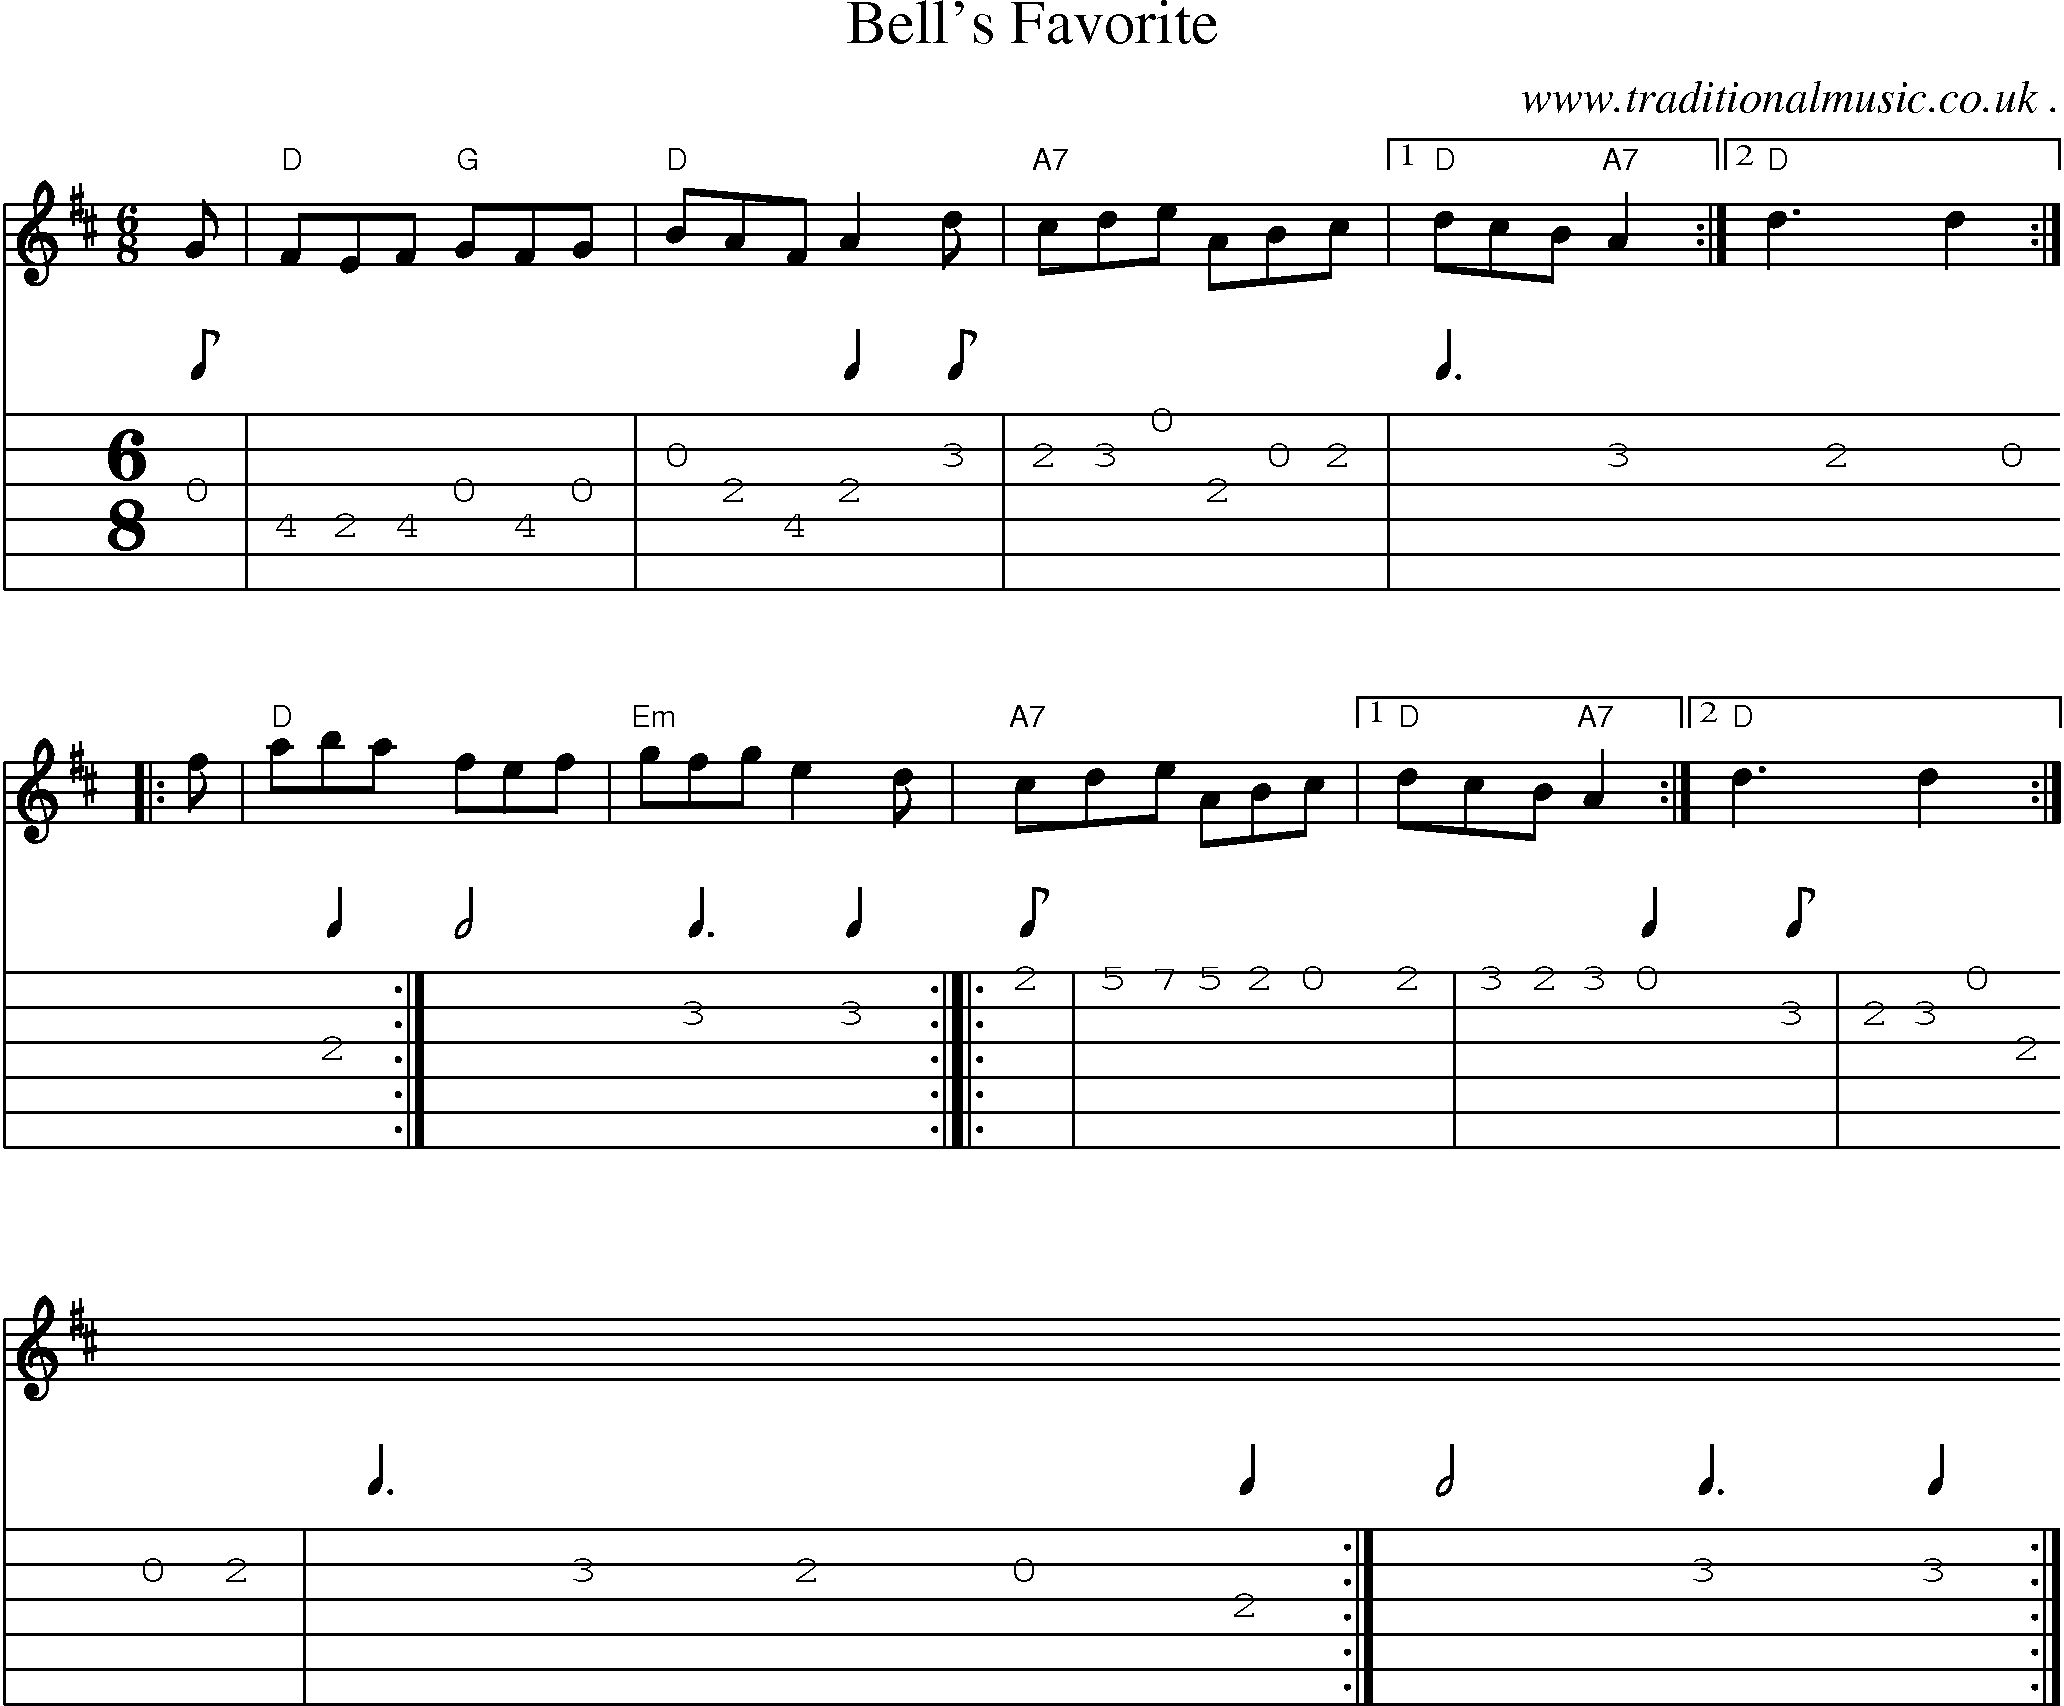 Sheet-music  score, Chords and Guitar Tabs for Bells Favorite